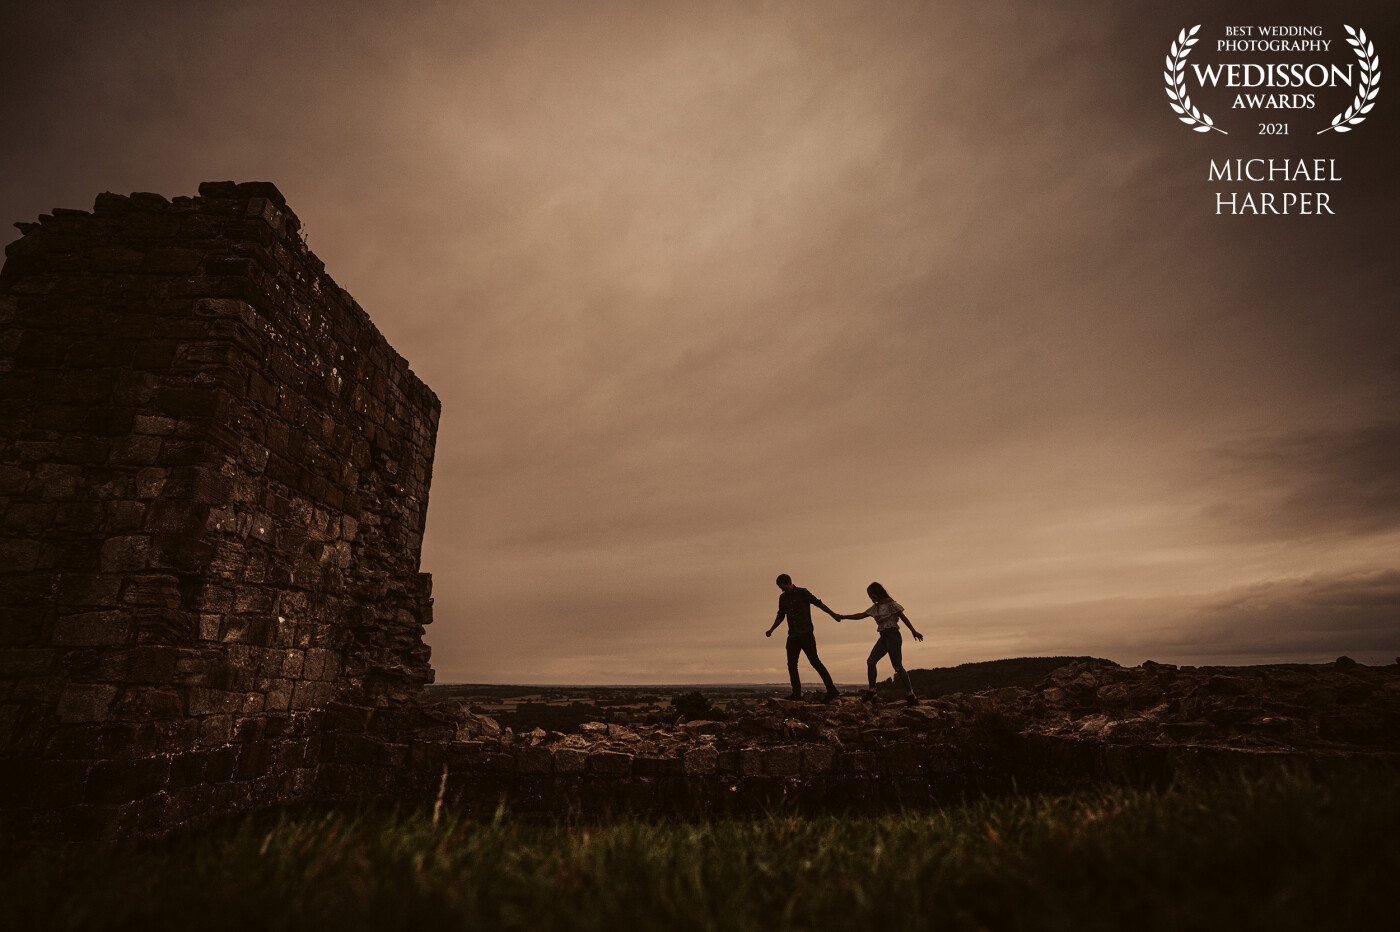 Ahead of the big day we took the couple to Beatson Castle, walking the walls with a drop on the other side this brave couple lead each other across as the sunset in the distance making a moody sky.